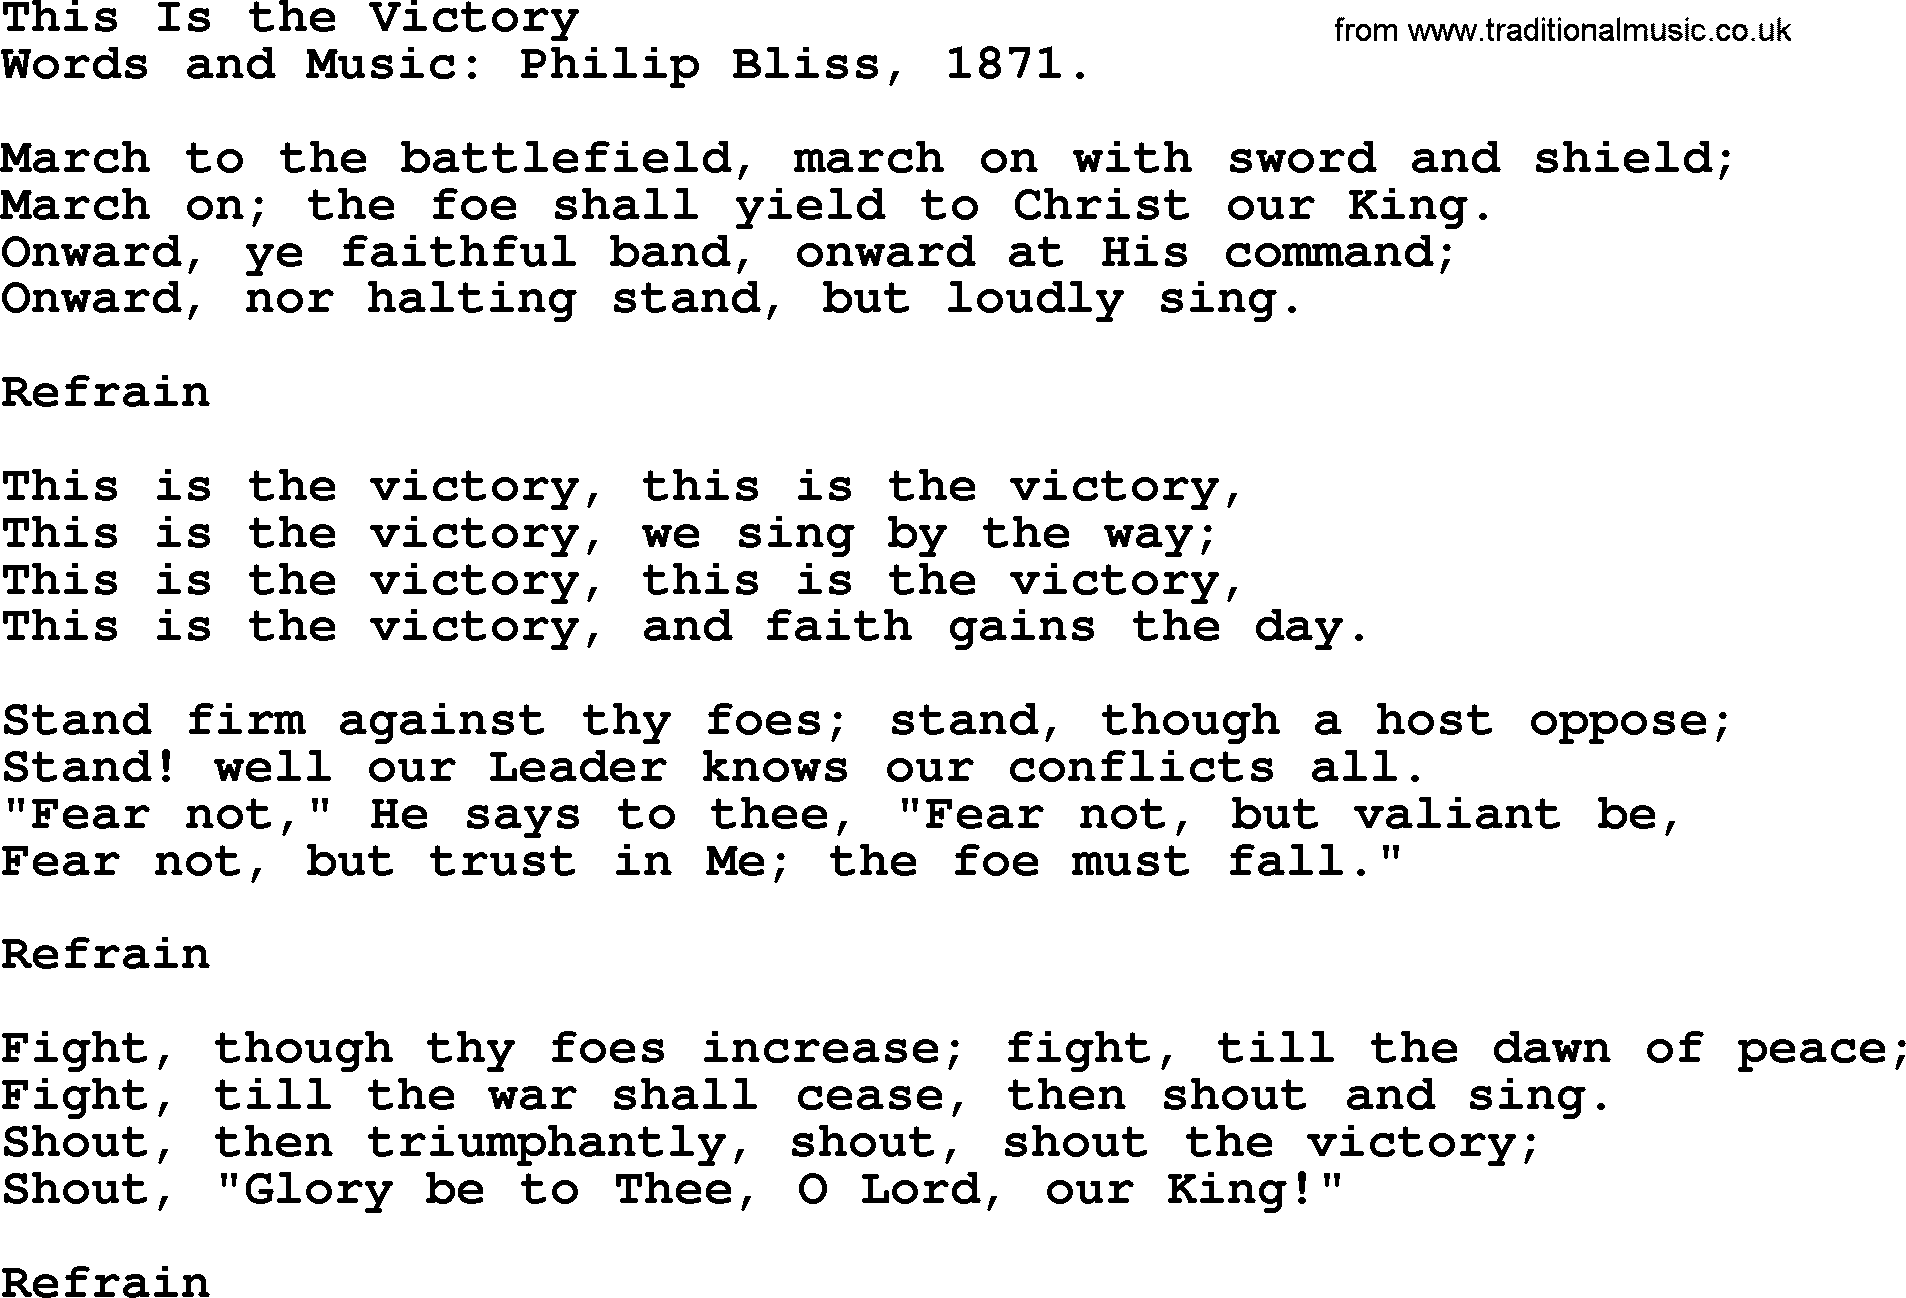 Philip Bliss Song: This Is The Victory, lyrics